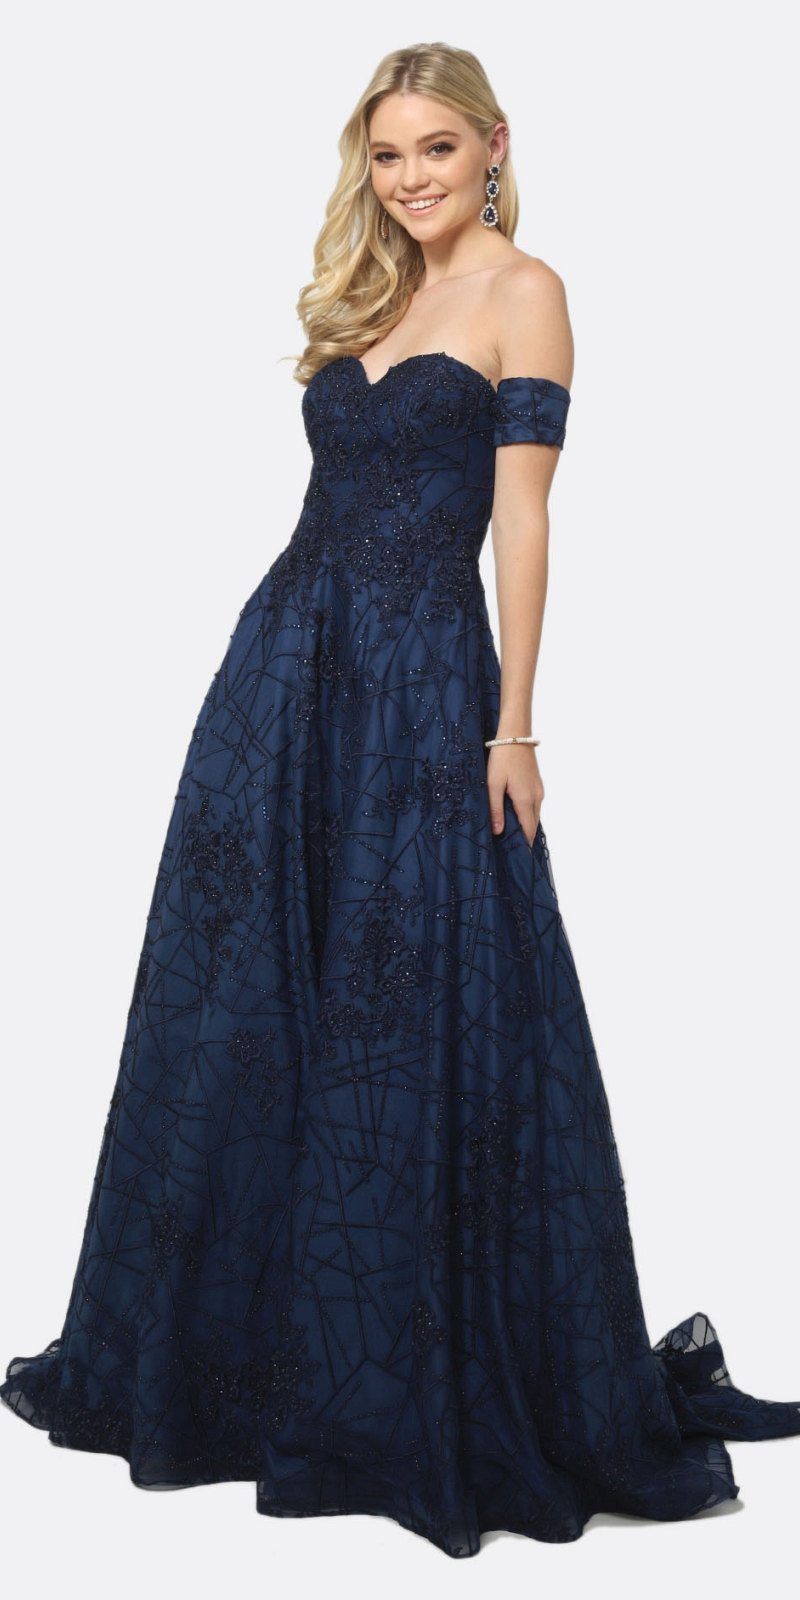 Juliet 692 Long Embroidered Lace Ball Gown Dress Navy With Arm Band